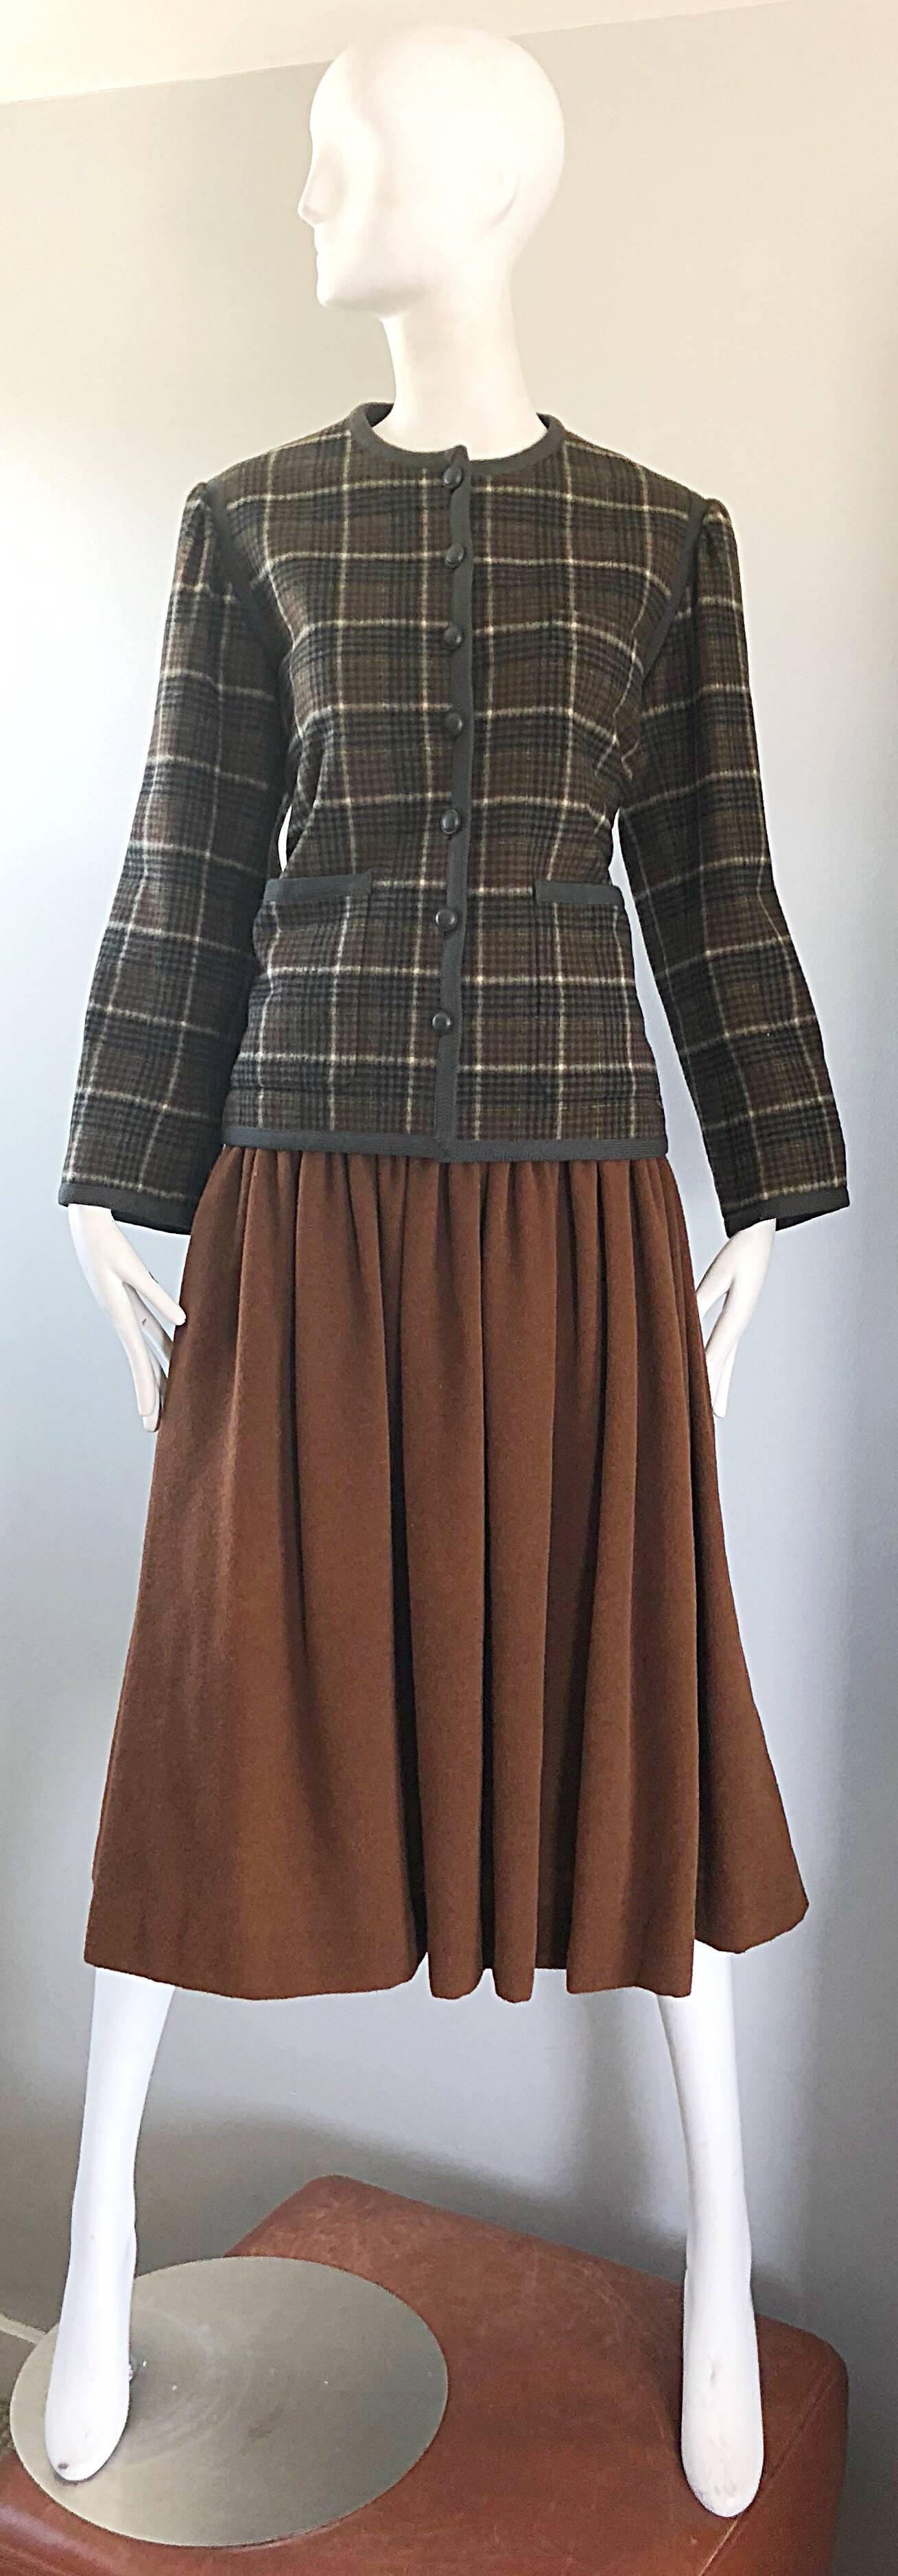 Iconic vintage 1970s YSL YVES SAINT LAURENT Paris 'Rive Gauche' virgin wool jacket and skirt suit from the famed 1976 Russian Collection! Jacket features a windowpane gingham checkered print in gray, taupe, brown, yellow and ivory. Buttons up the